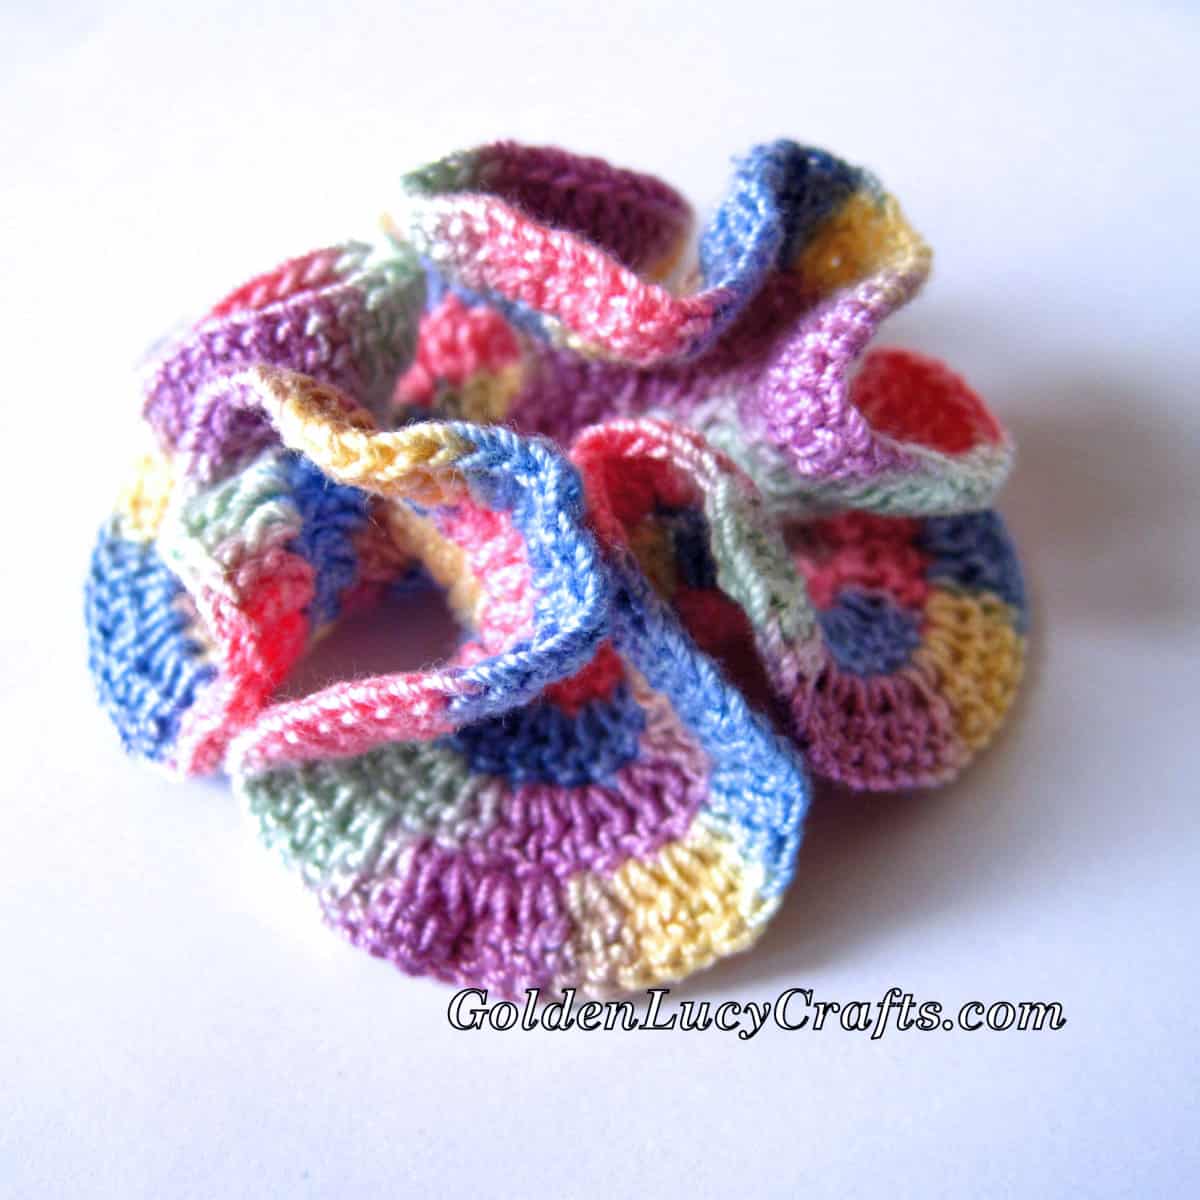 Crochet hyperbolic coral made with multi-color yarn.